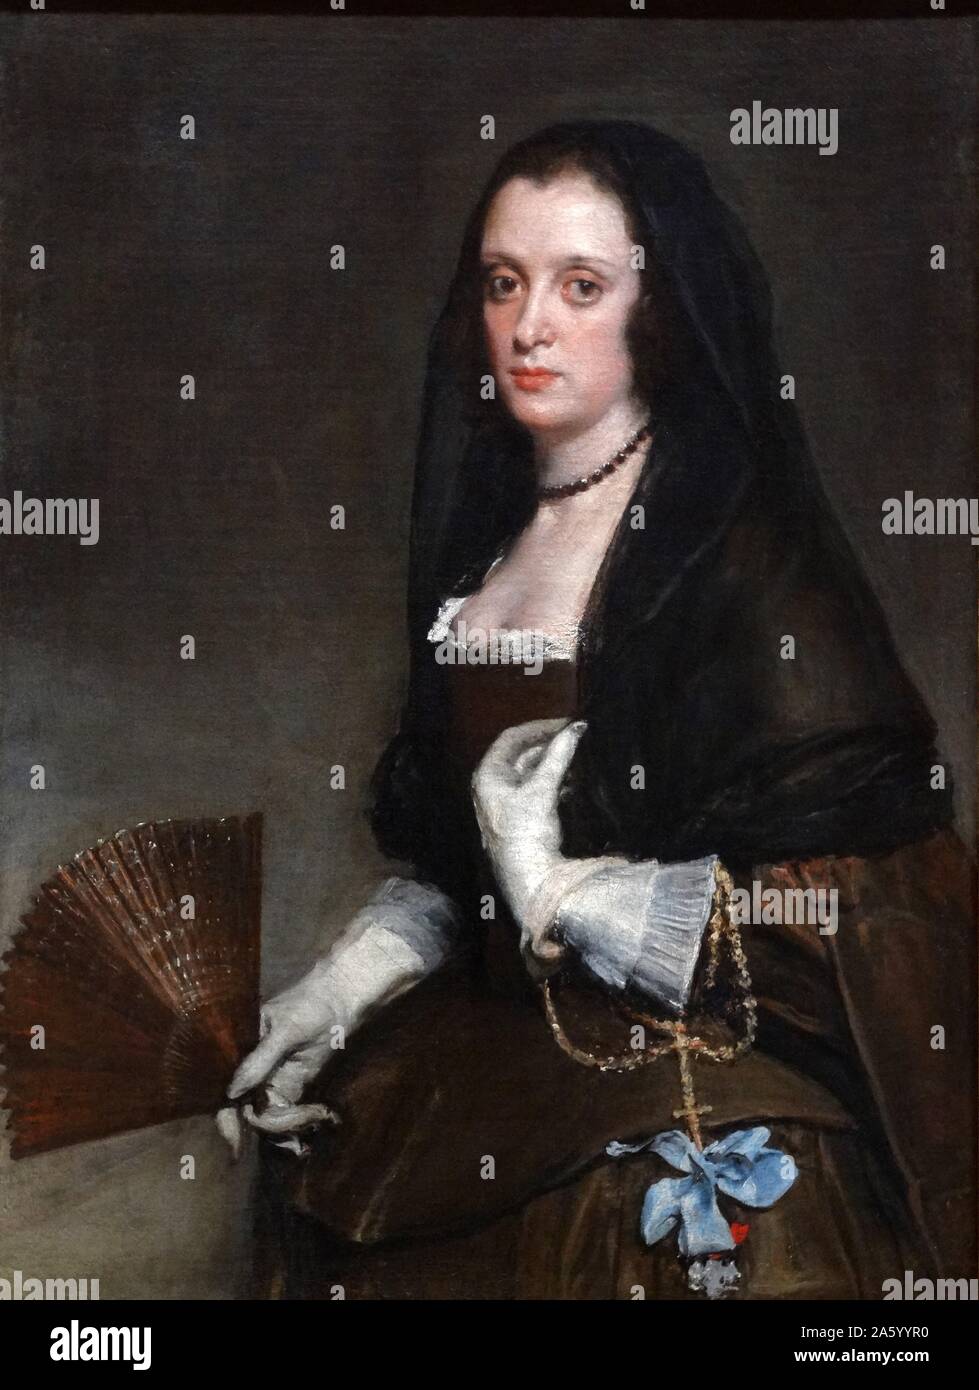 Painting titled 'The Lady with a Fan' by Diego Velázquez (1599-1660) a Spanish painter and leading artist for the Court of King Philip IV. Dated 17th Century Stock Photo